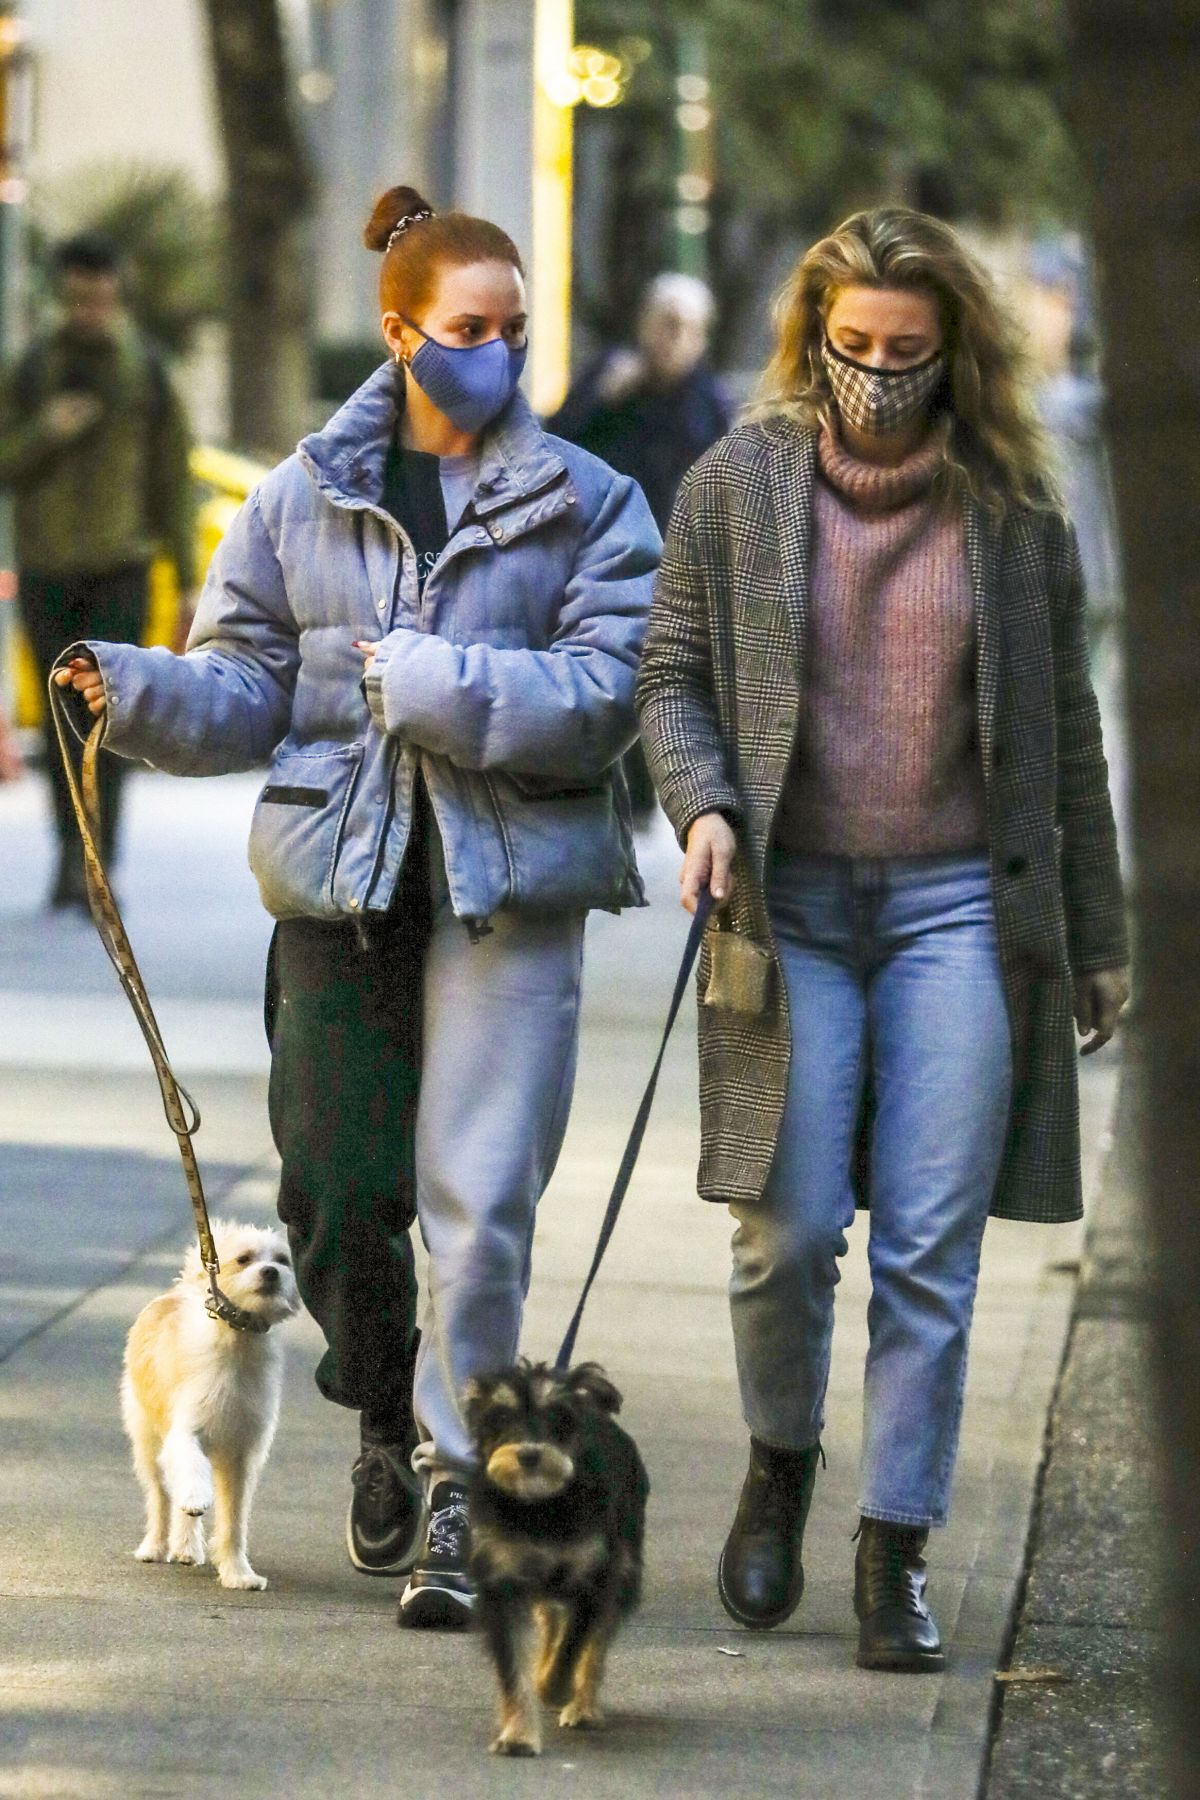 madelaine-petsch-and-lily-reinhart-out-with-their-dogs-in-vancouver-11-09-2020-3.jpg